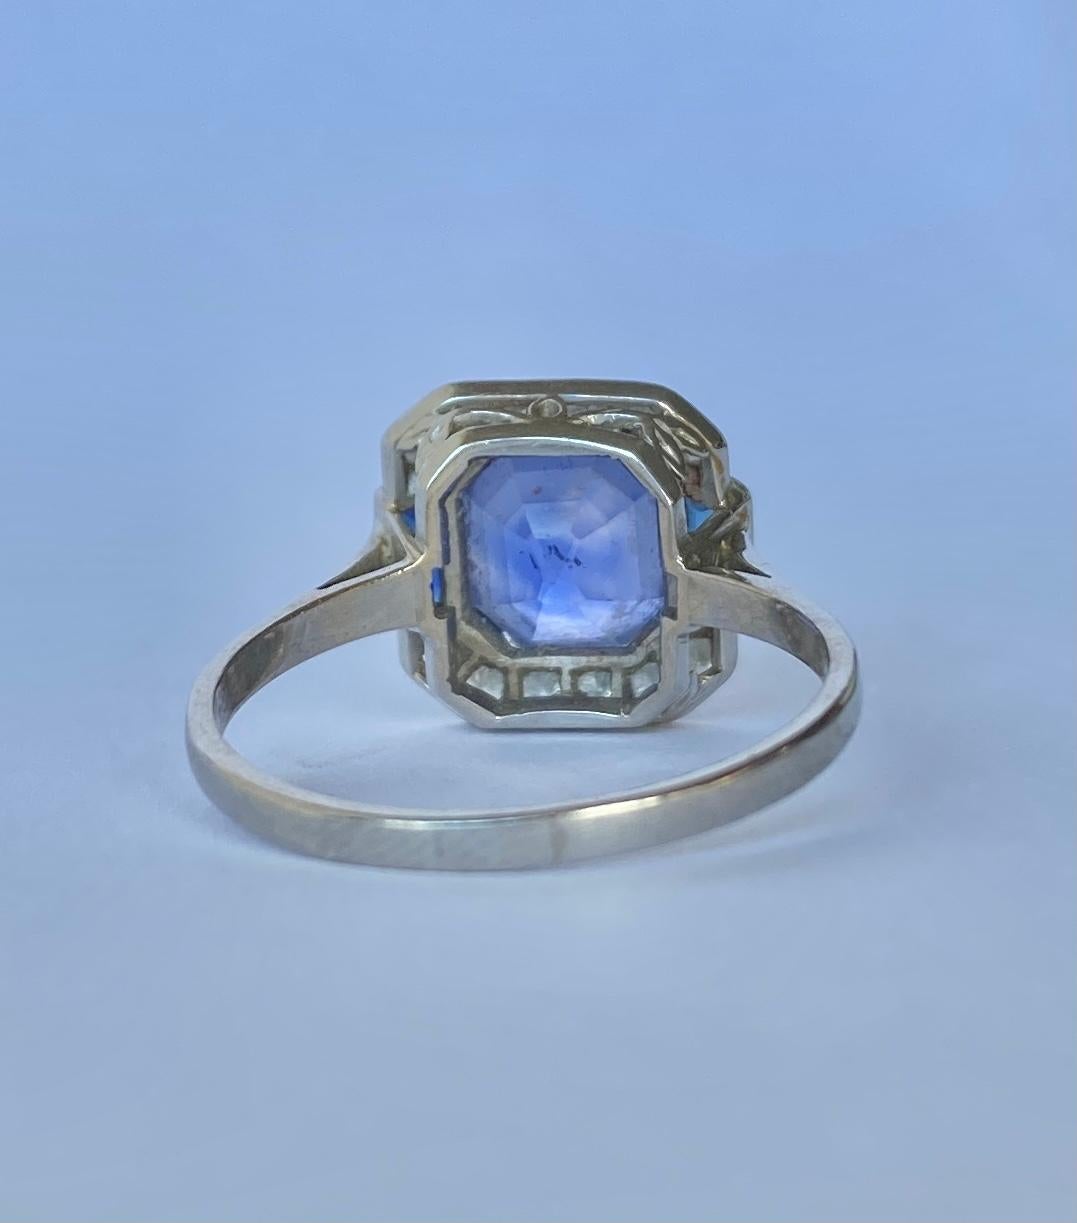 This stunning ring holds a central emerald cut sapphire measuring approx 4carat. The sapphire is natural with no heat treatment. Either side of this sapphire are two smaller step cut trapezium sapphires. Above and below the large sapphire is a row